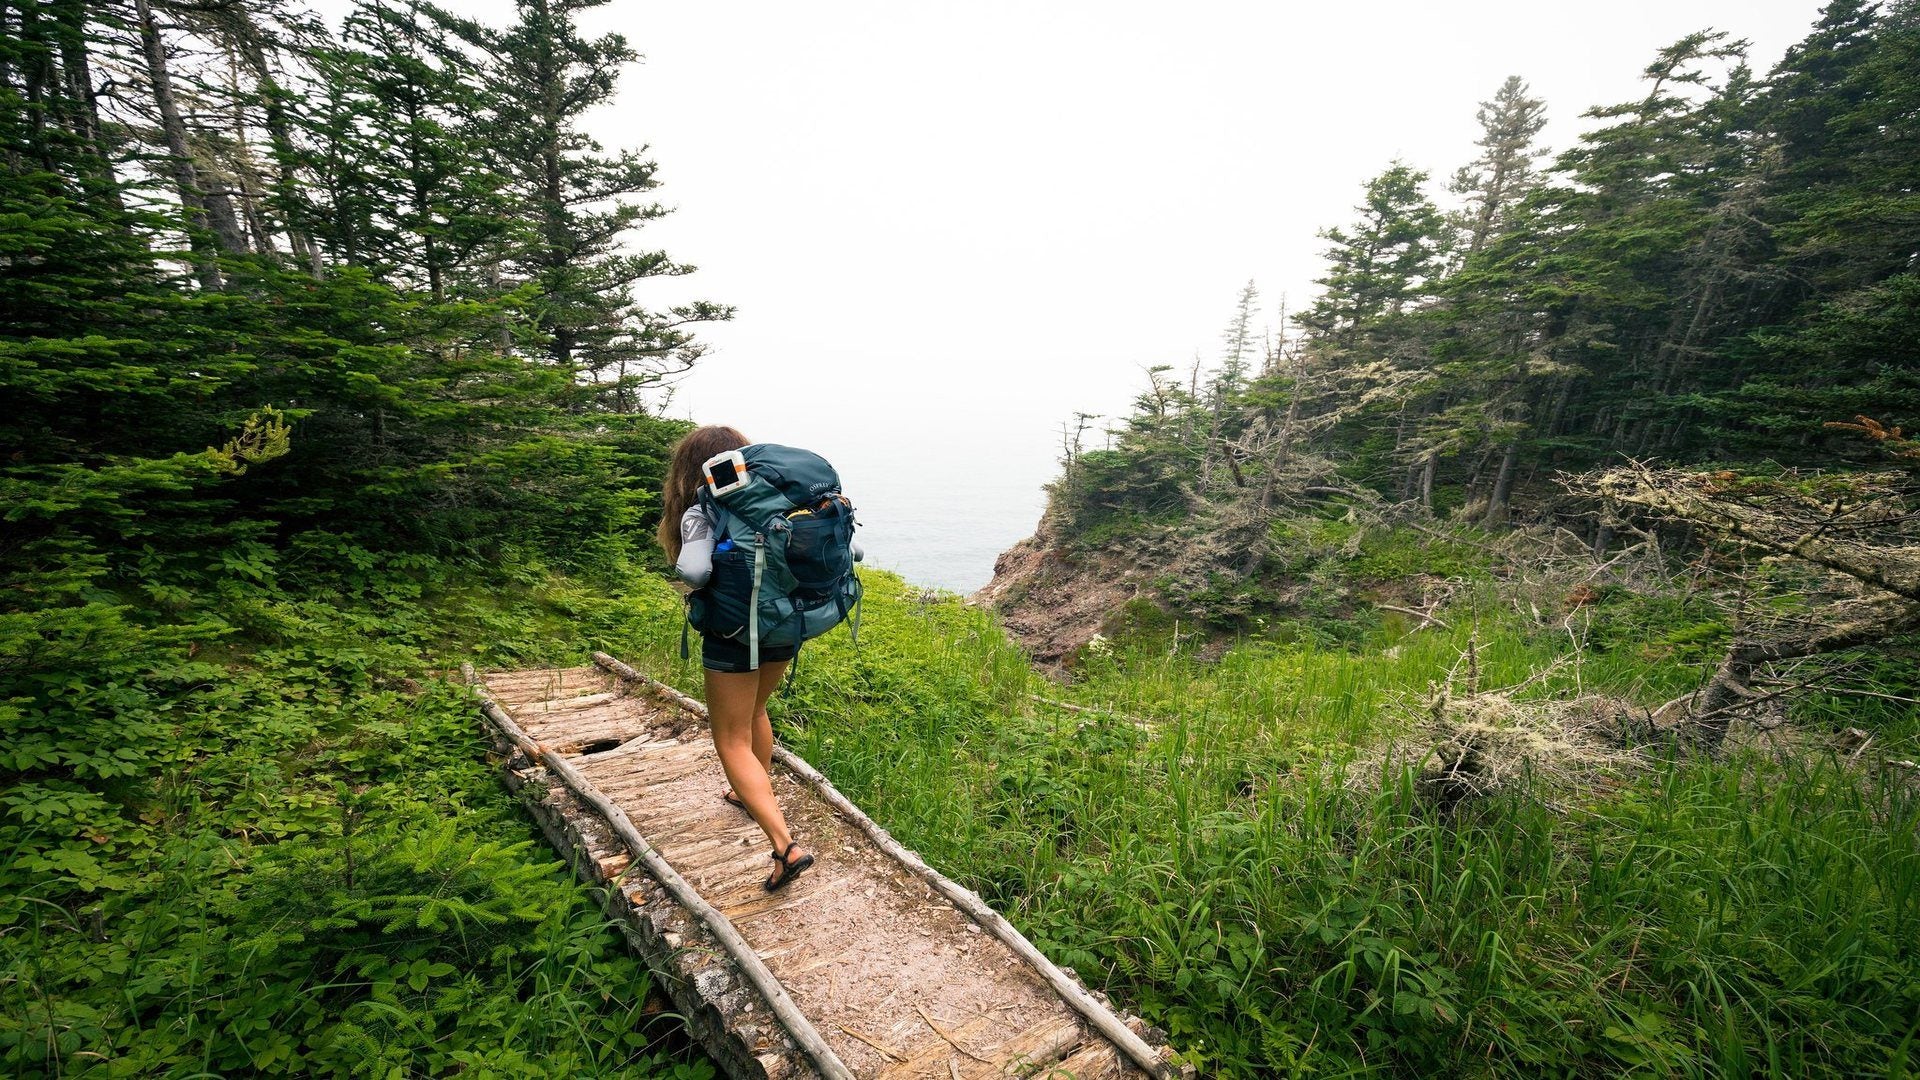 Woman backpacking in the beautiful outdoors. Source: Taylor Burk